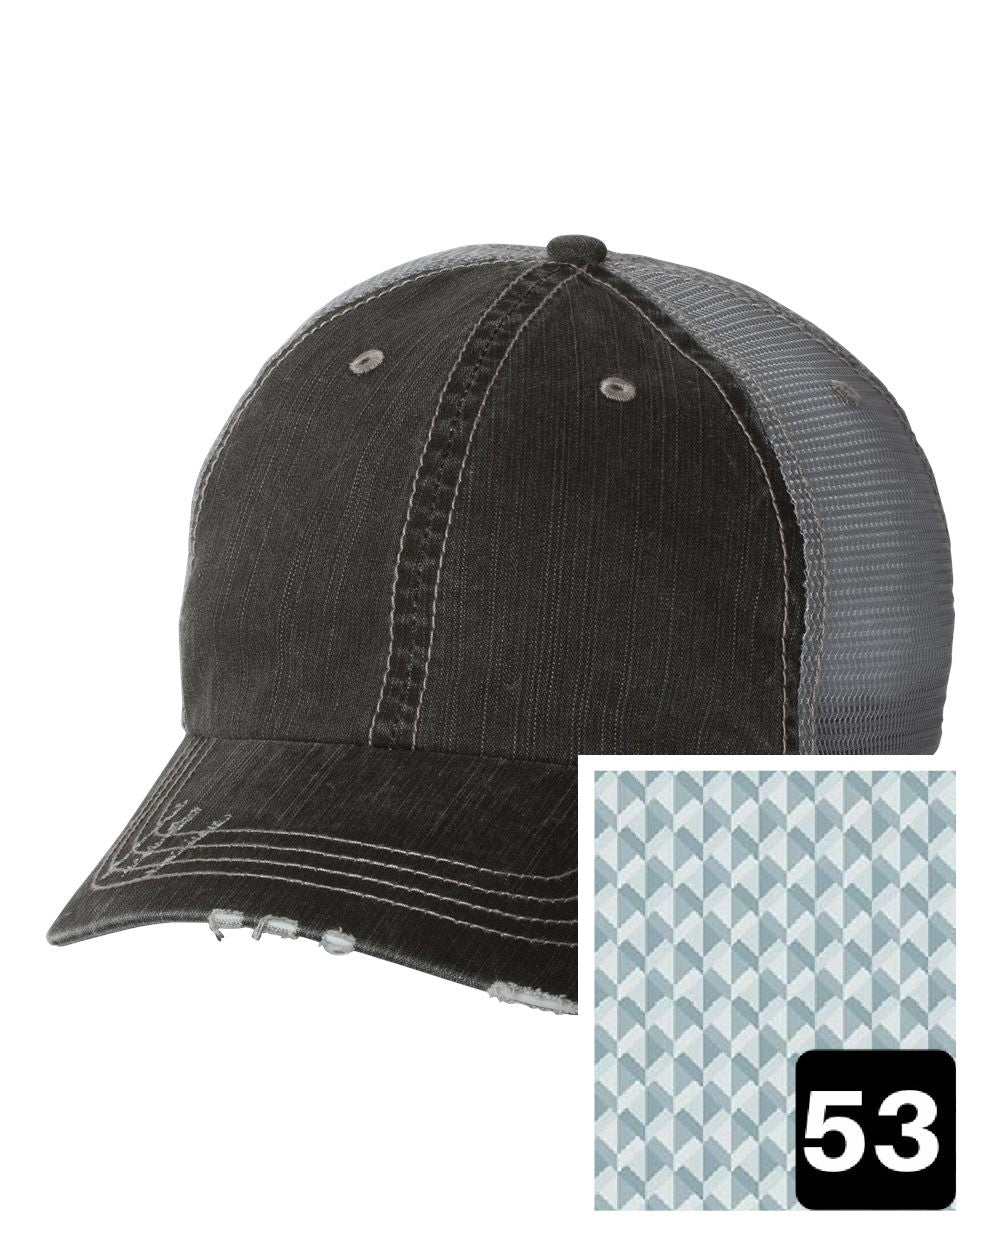 gray distressed trucker hat with multi-color stripe fabric state of Kentucky